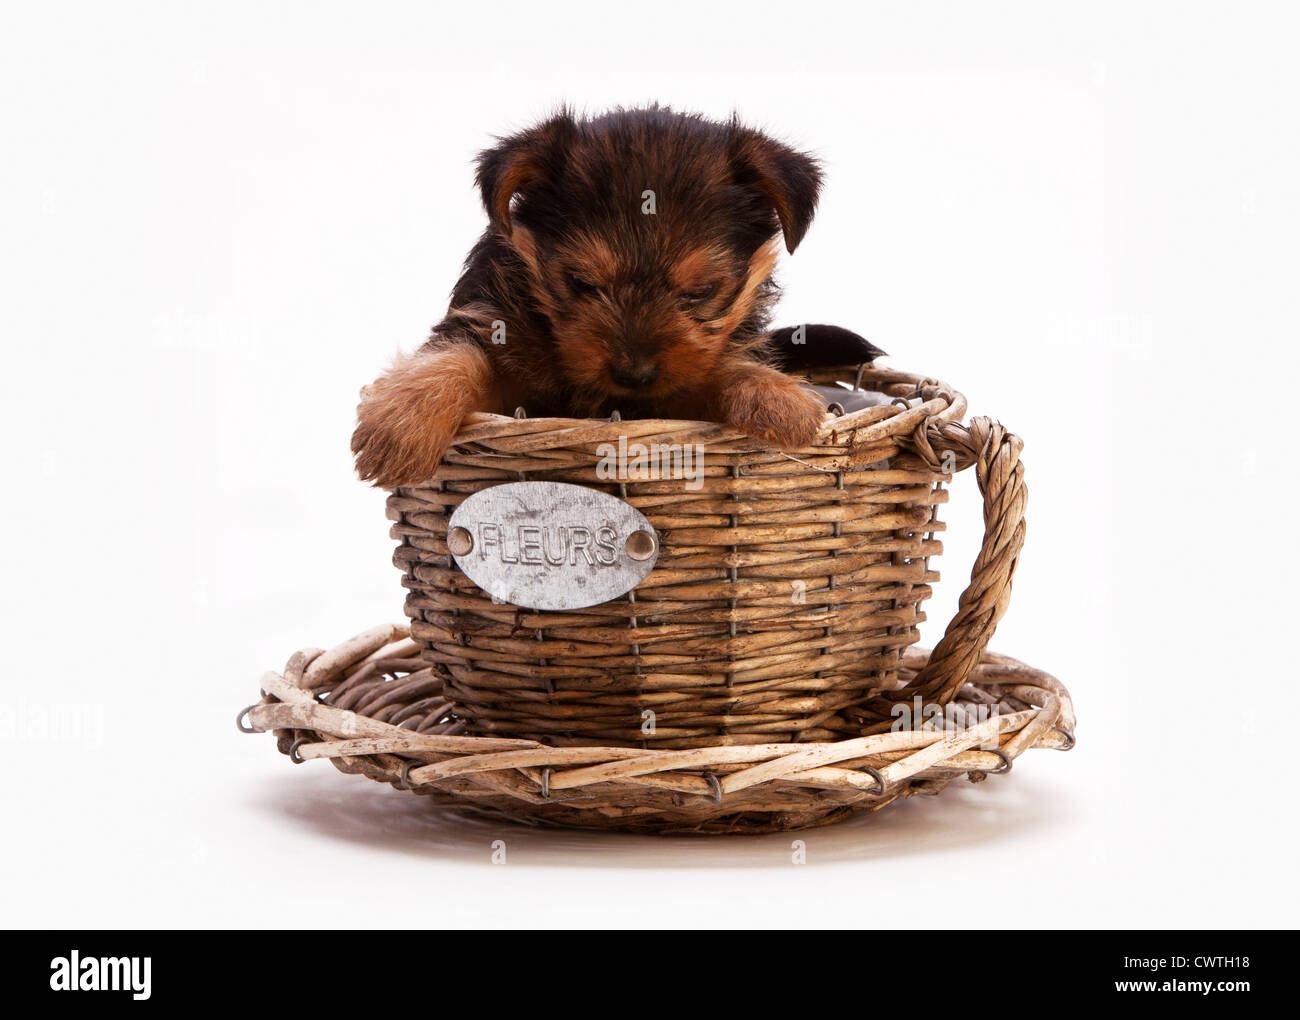 A yorkshire terrier puppy in a wickerwork cup or basket Stock Photo